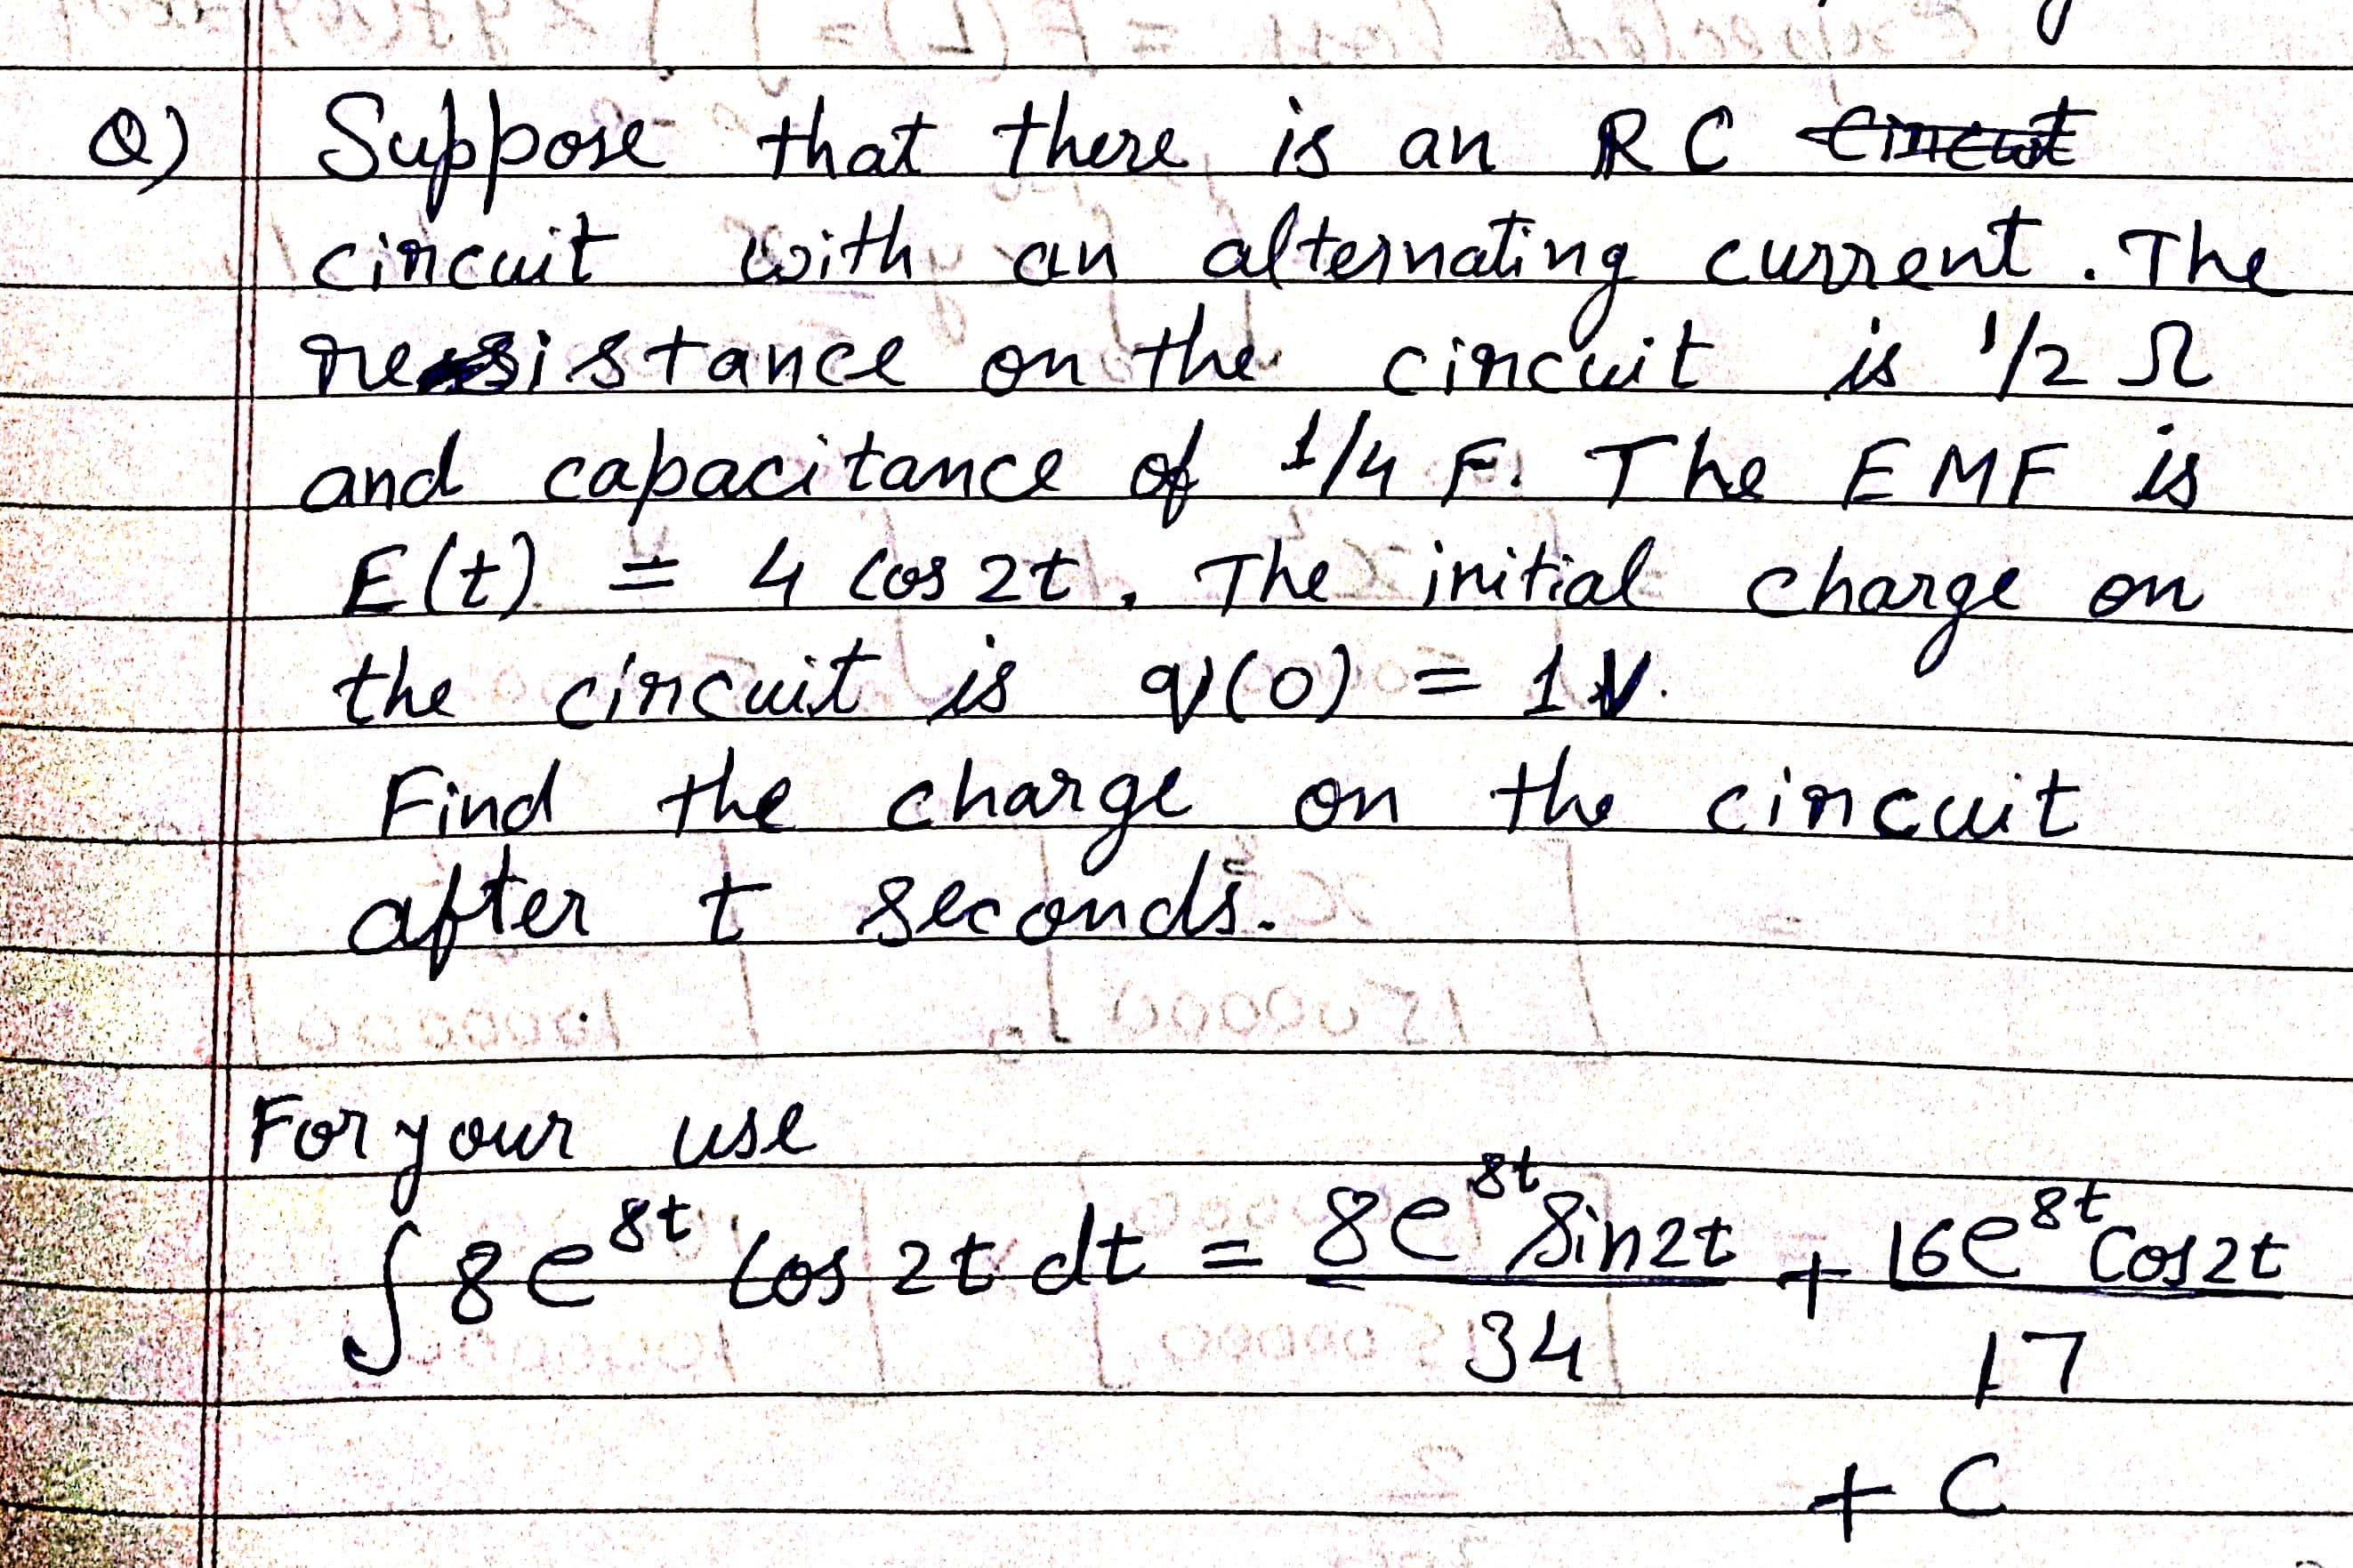 Support that there.
Icincuit Esithu an
reasistanee on the
and capacitance of /4 F. The EMF is
) 4 Cos 2t , The initial
is an RC Cnerat
current. The
alternating
cincuit is '/
2 L
Elt)
the cincuit is qu(0) = 1V.
Find the charge on the cincuit
after t seconds.
charge
on
